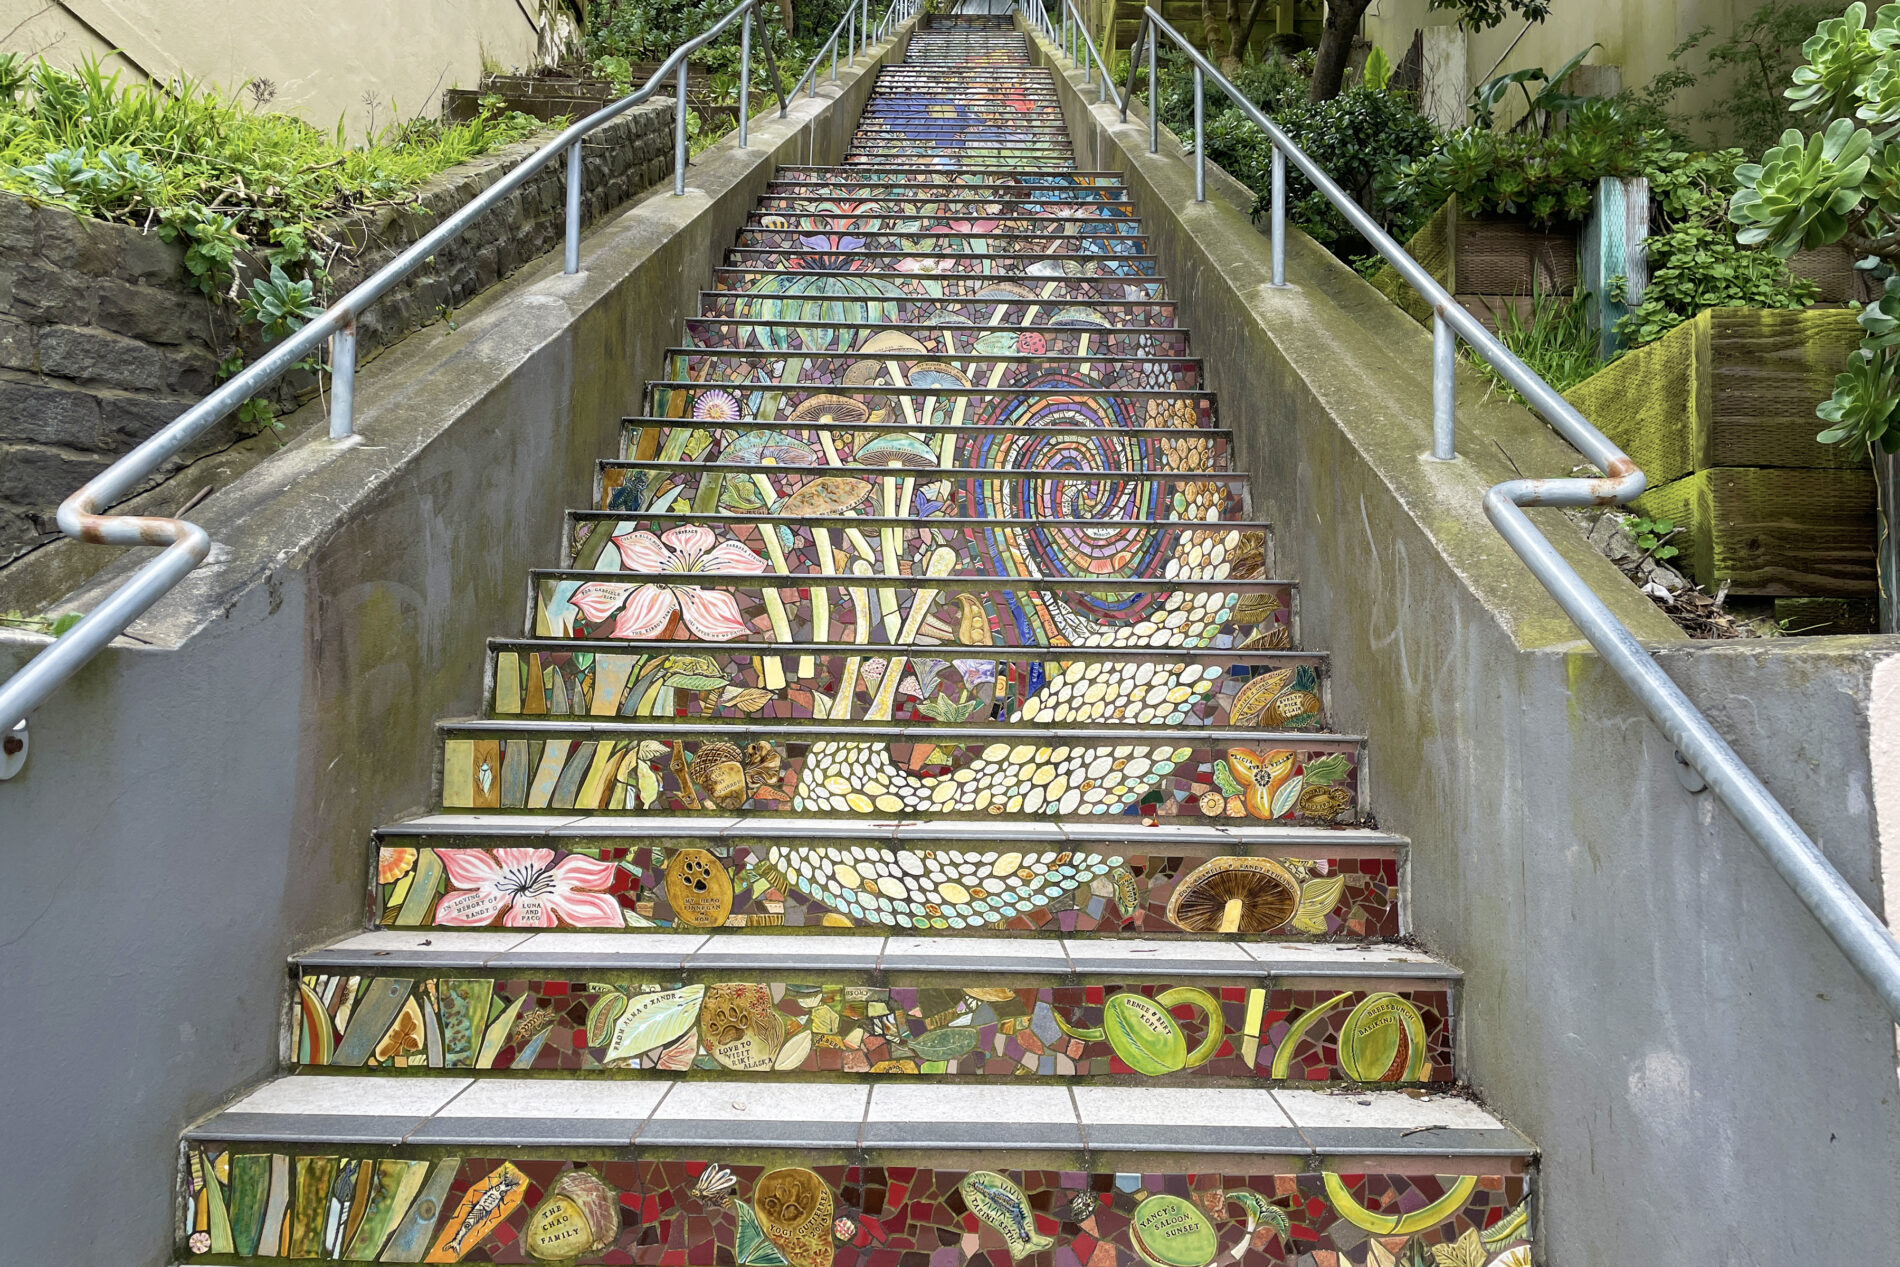 A giant snail and wild mushrooms in the mosaic mural on the Hidden Garden Steps in San Francisco.